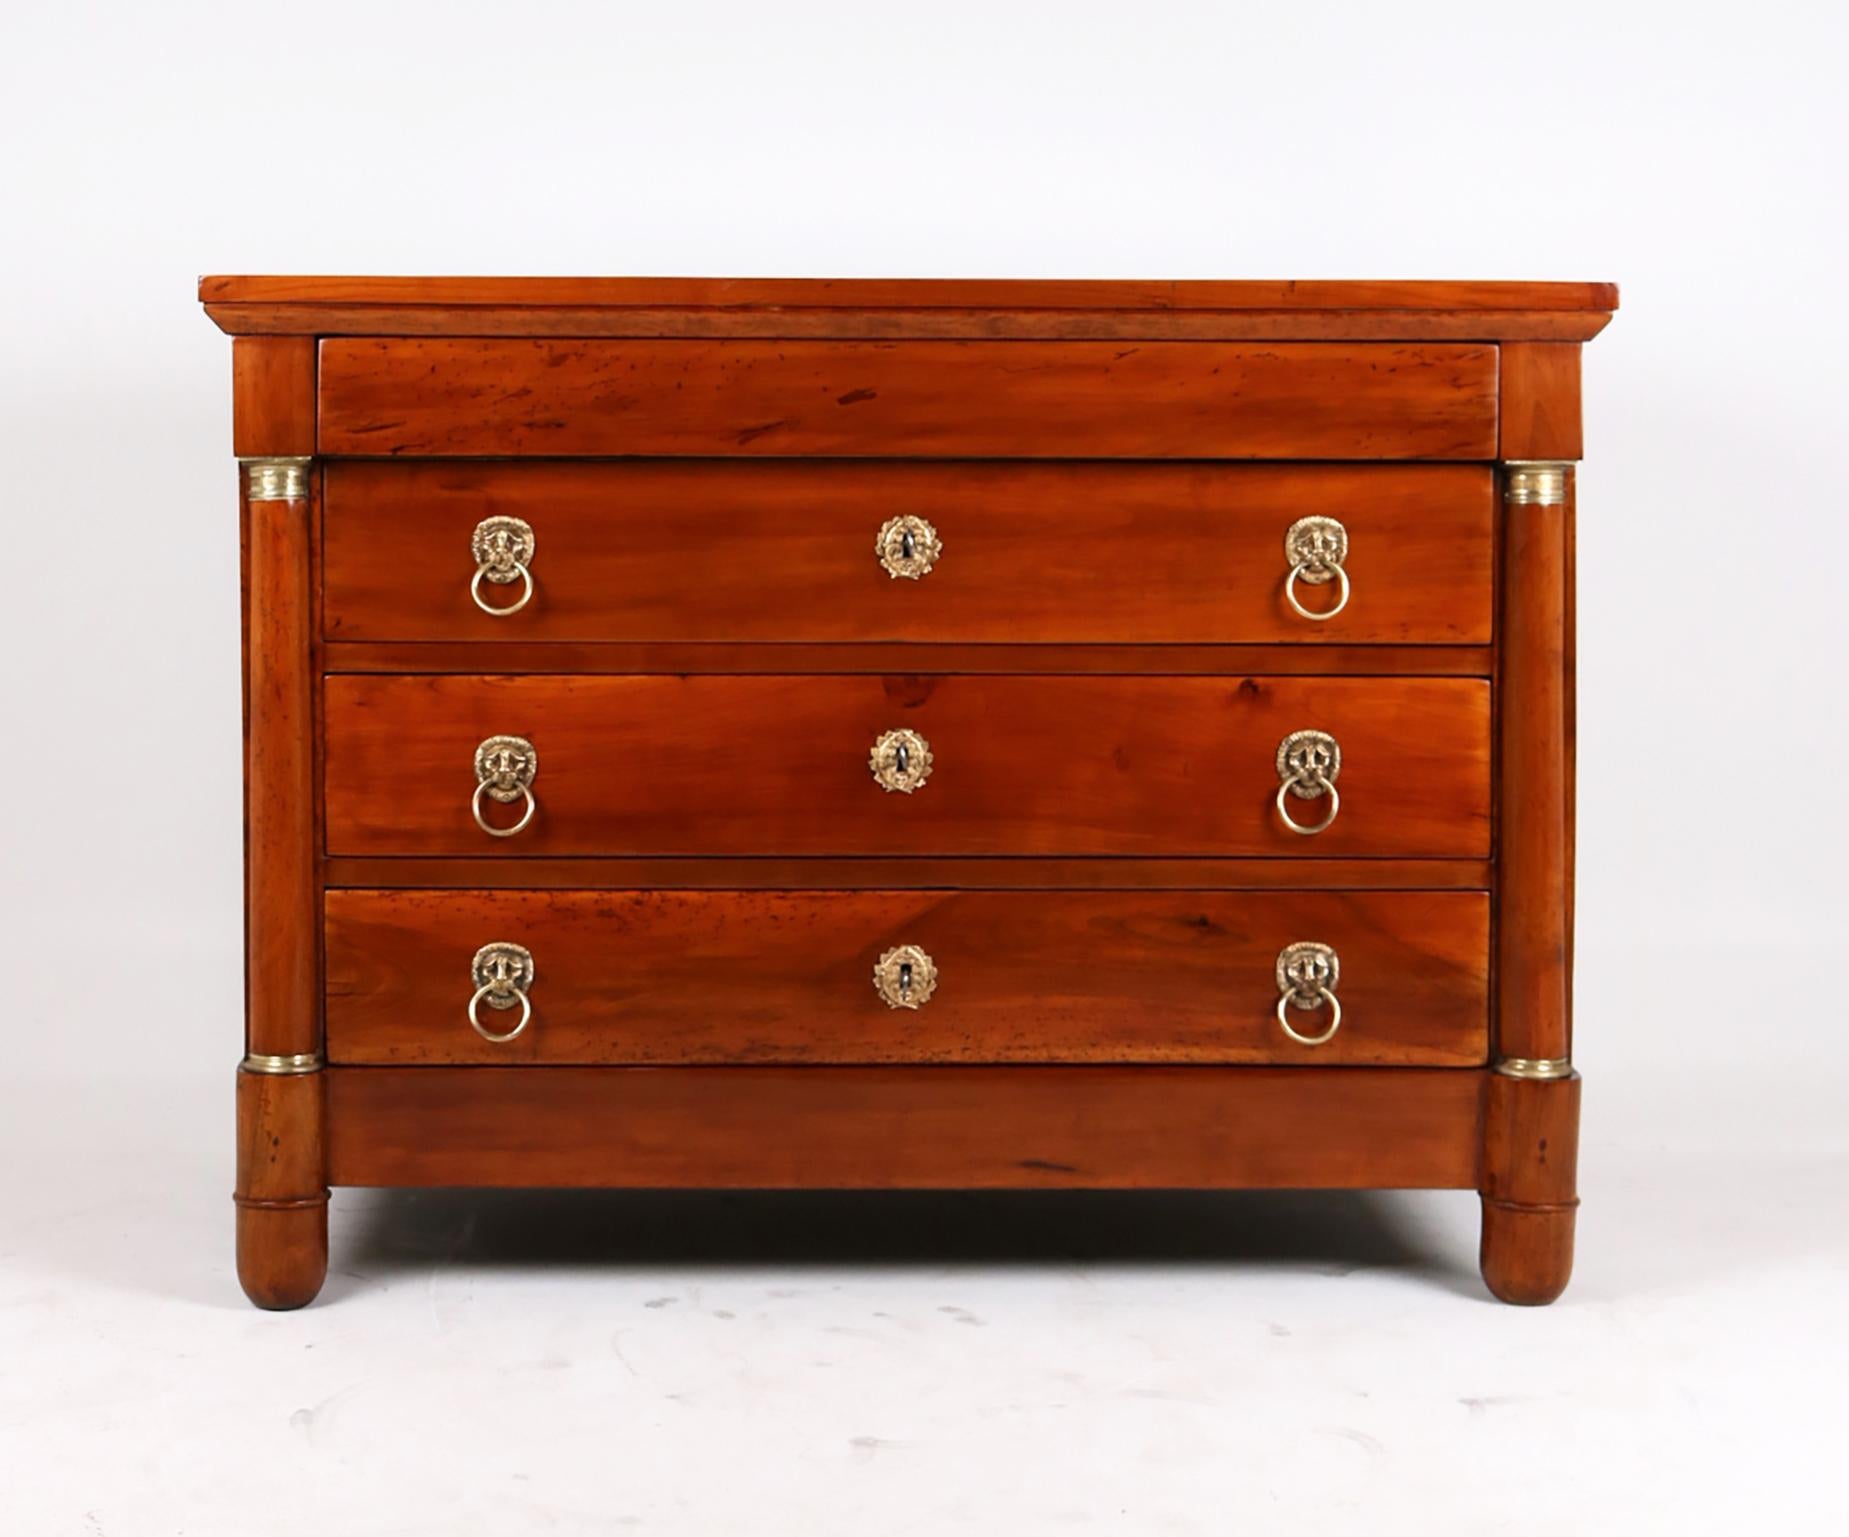 Four-bay chest of drawers from the French Empire around 1820.
Solid cherry wood piece of furniture standing on round feet in the front and cleated feet in the back.

The three lower drawers are equipped with ornate brass fittings in the form of